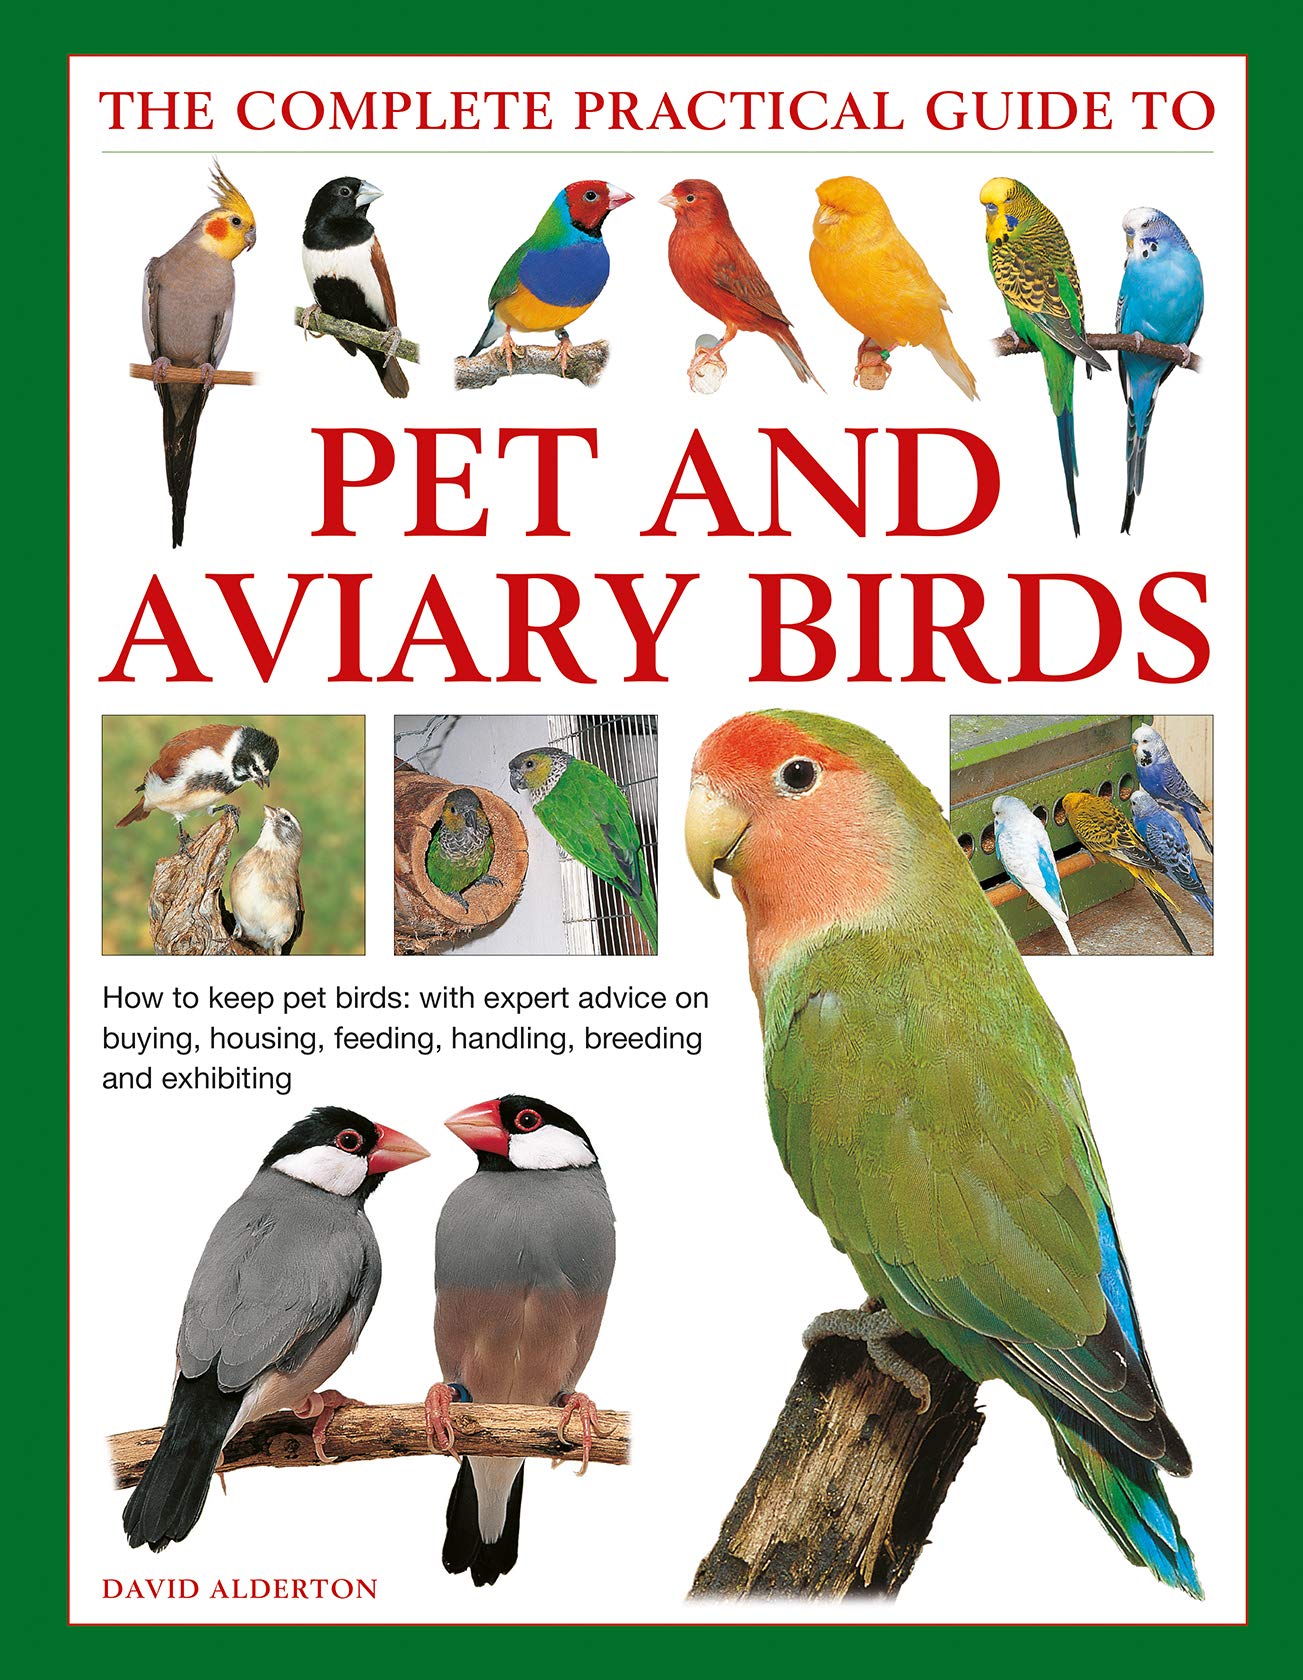 The Complete Practical Guide to Pet and Aviary Birds